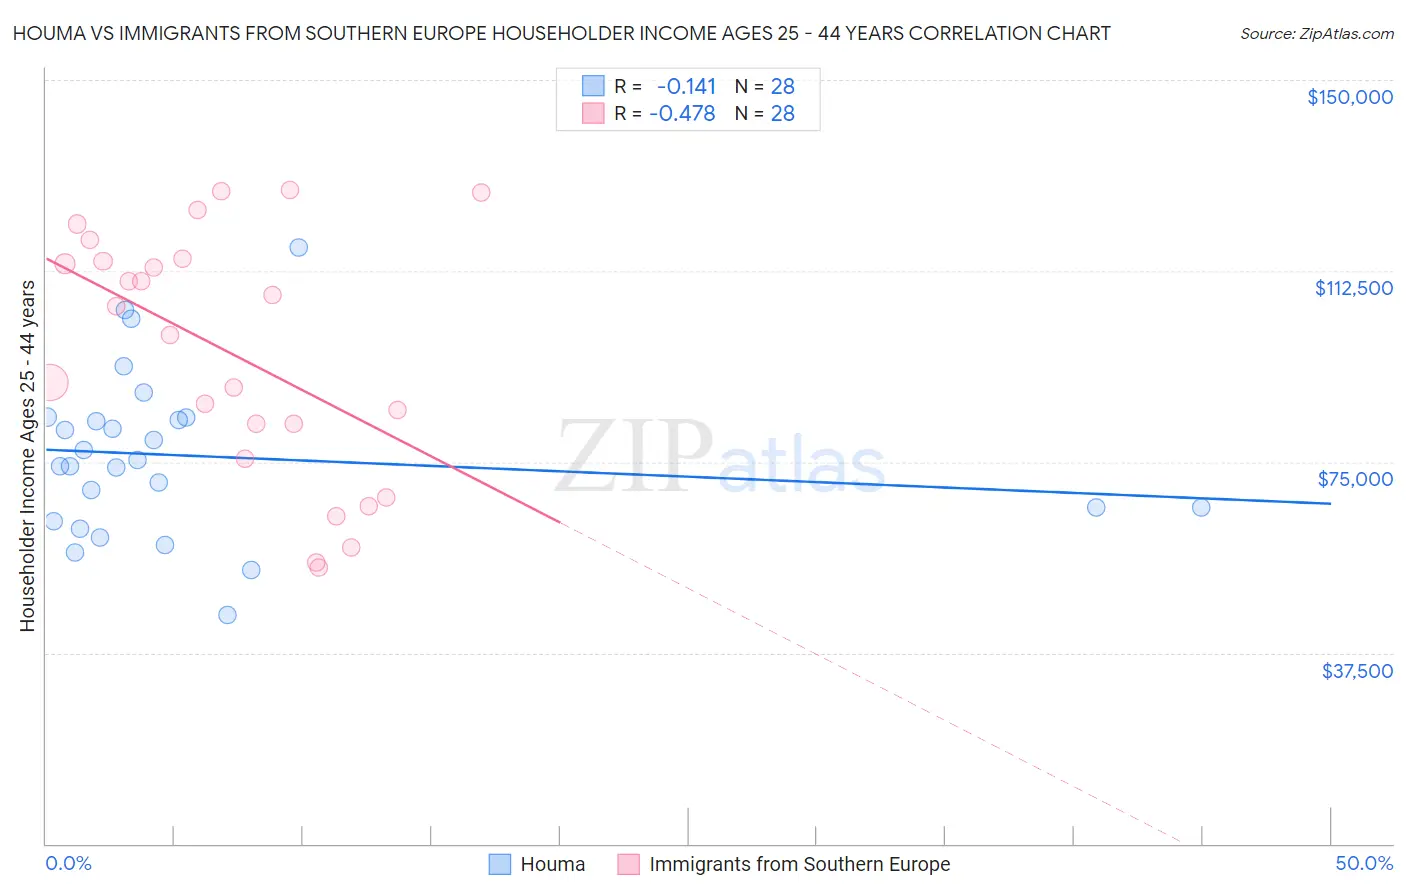 Houma vs Immigrants from Southern Europe Householder Income Ages 25 - 44 years